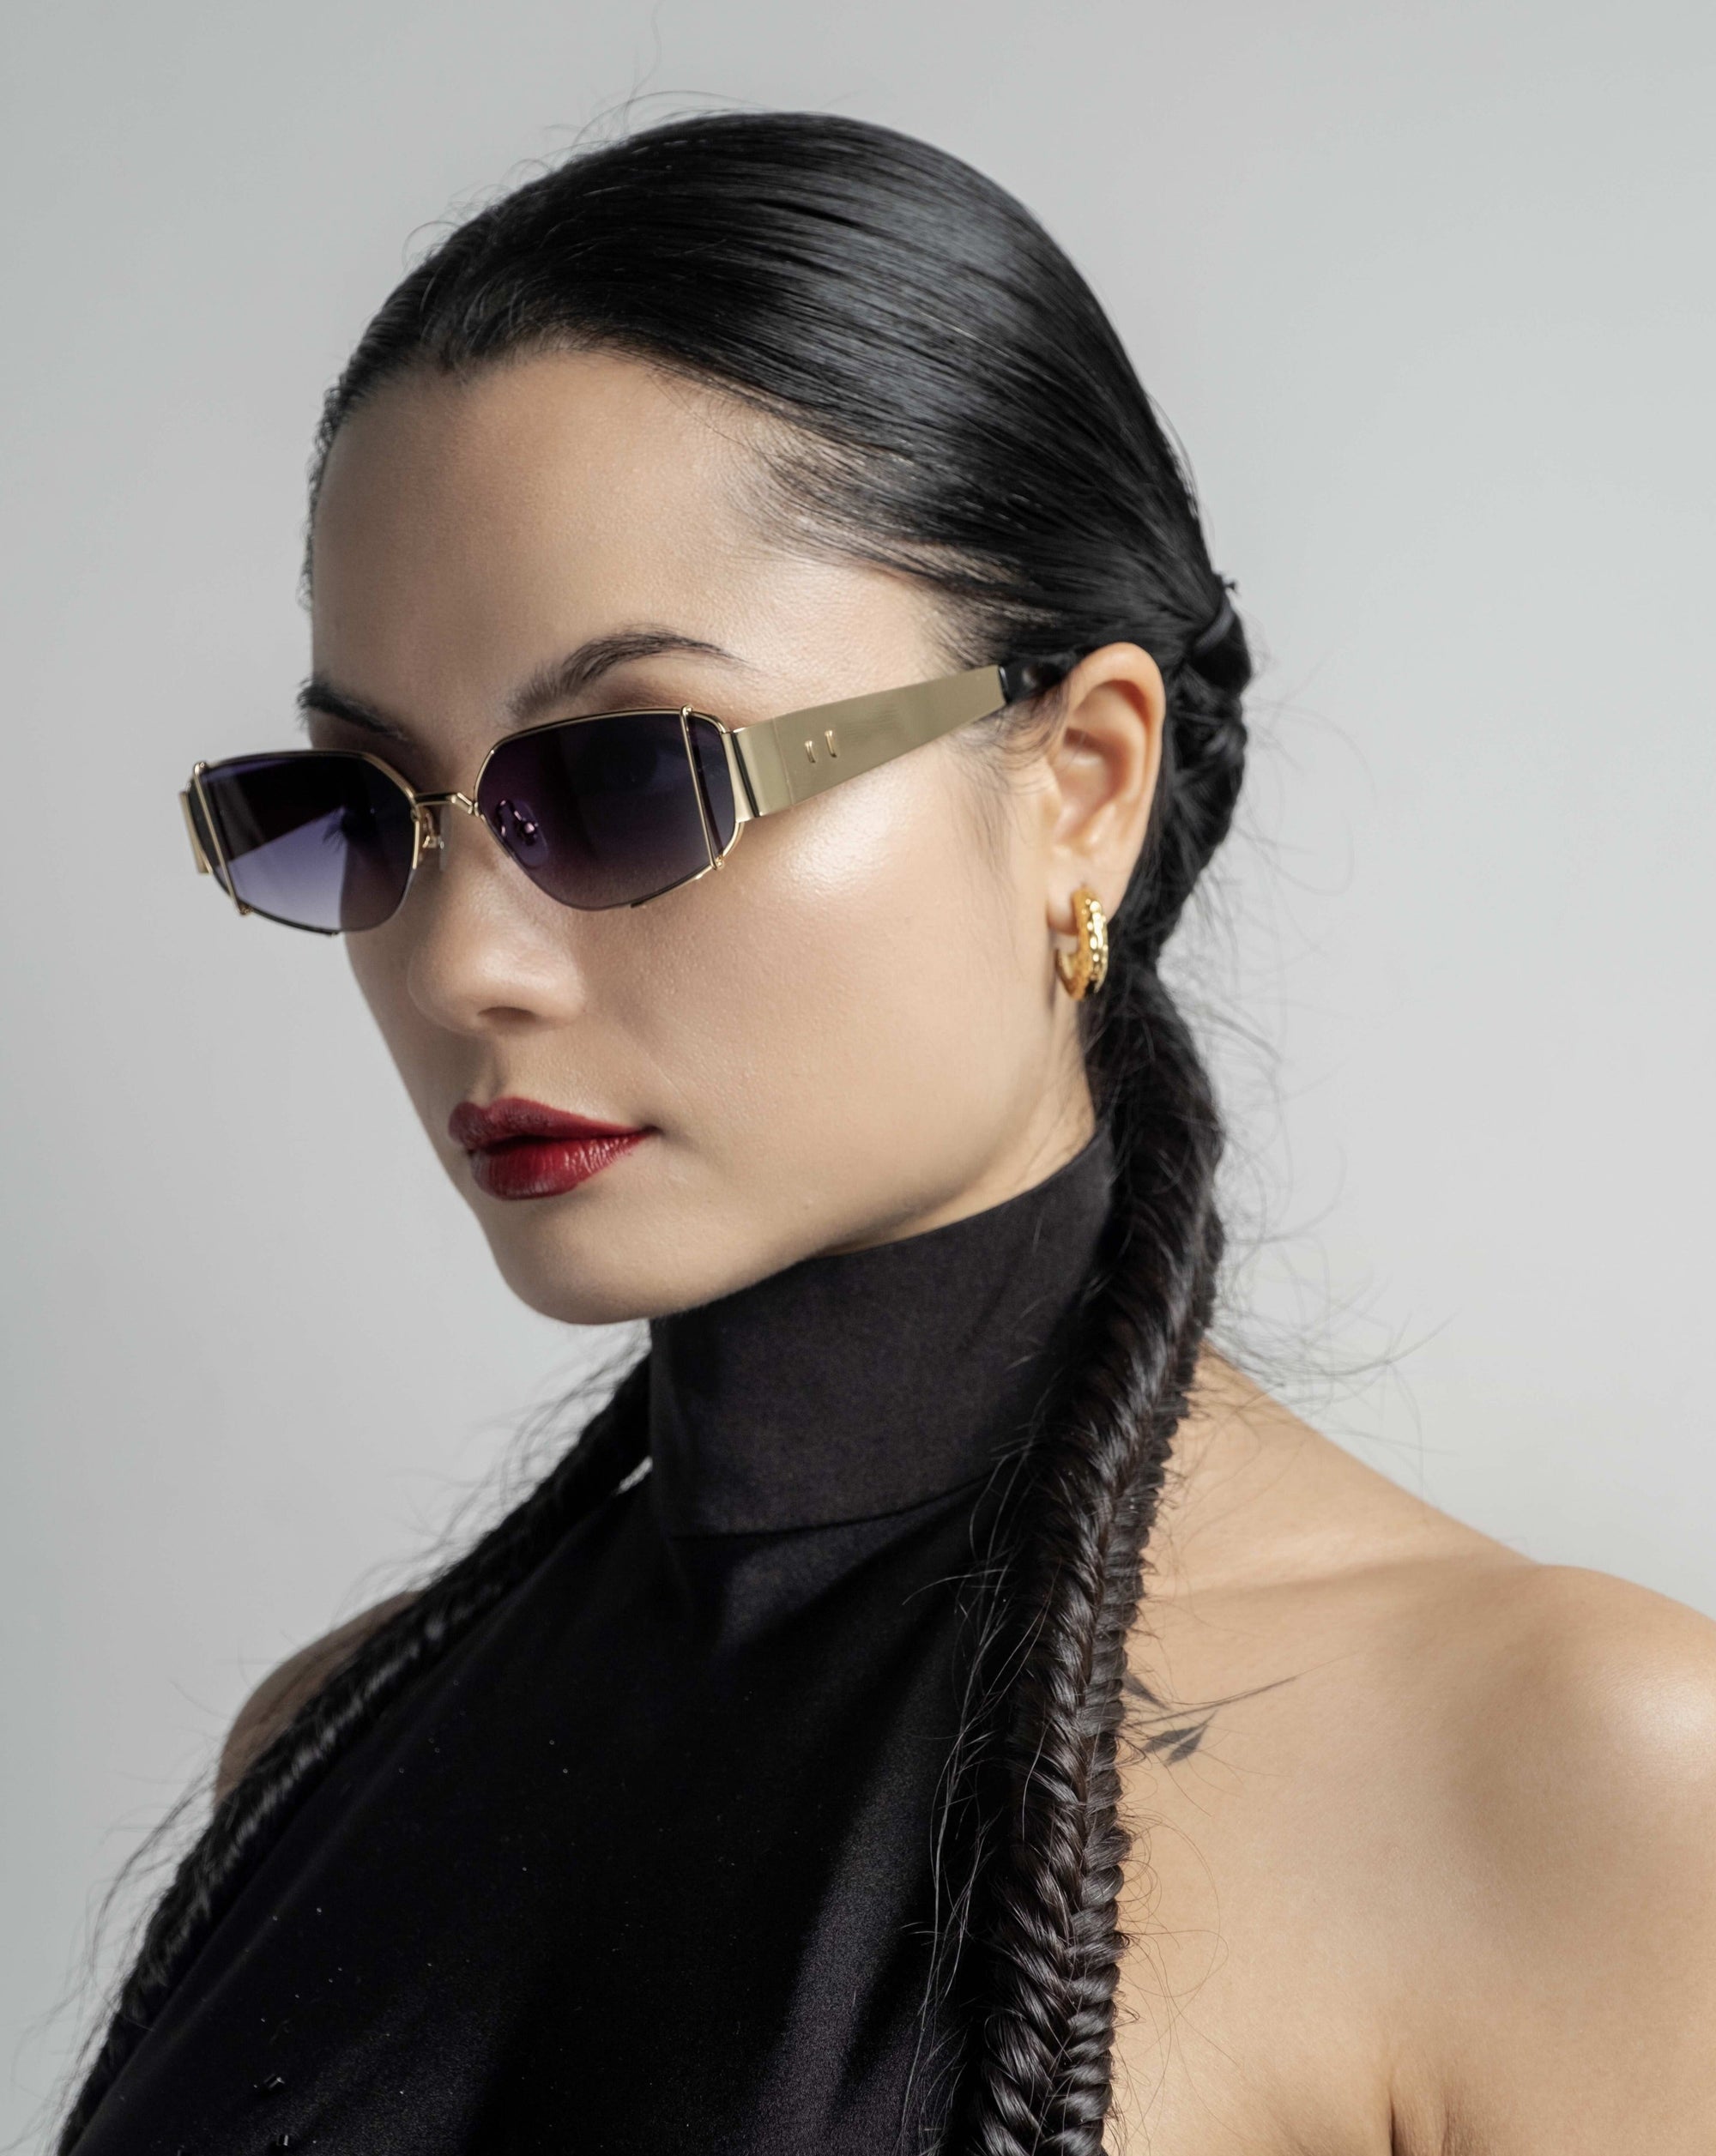 A woman with sleek black hair in braids, wearing Talia sunglasses by For Art&#39;s Sake® with metal frames and a black sleeveless high-collar top. She has 18-karat gold hoop earrings and a small tattoo on her shoulder. The background is a plain light gray.